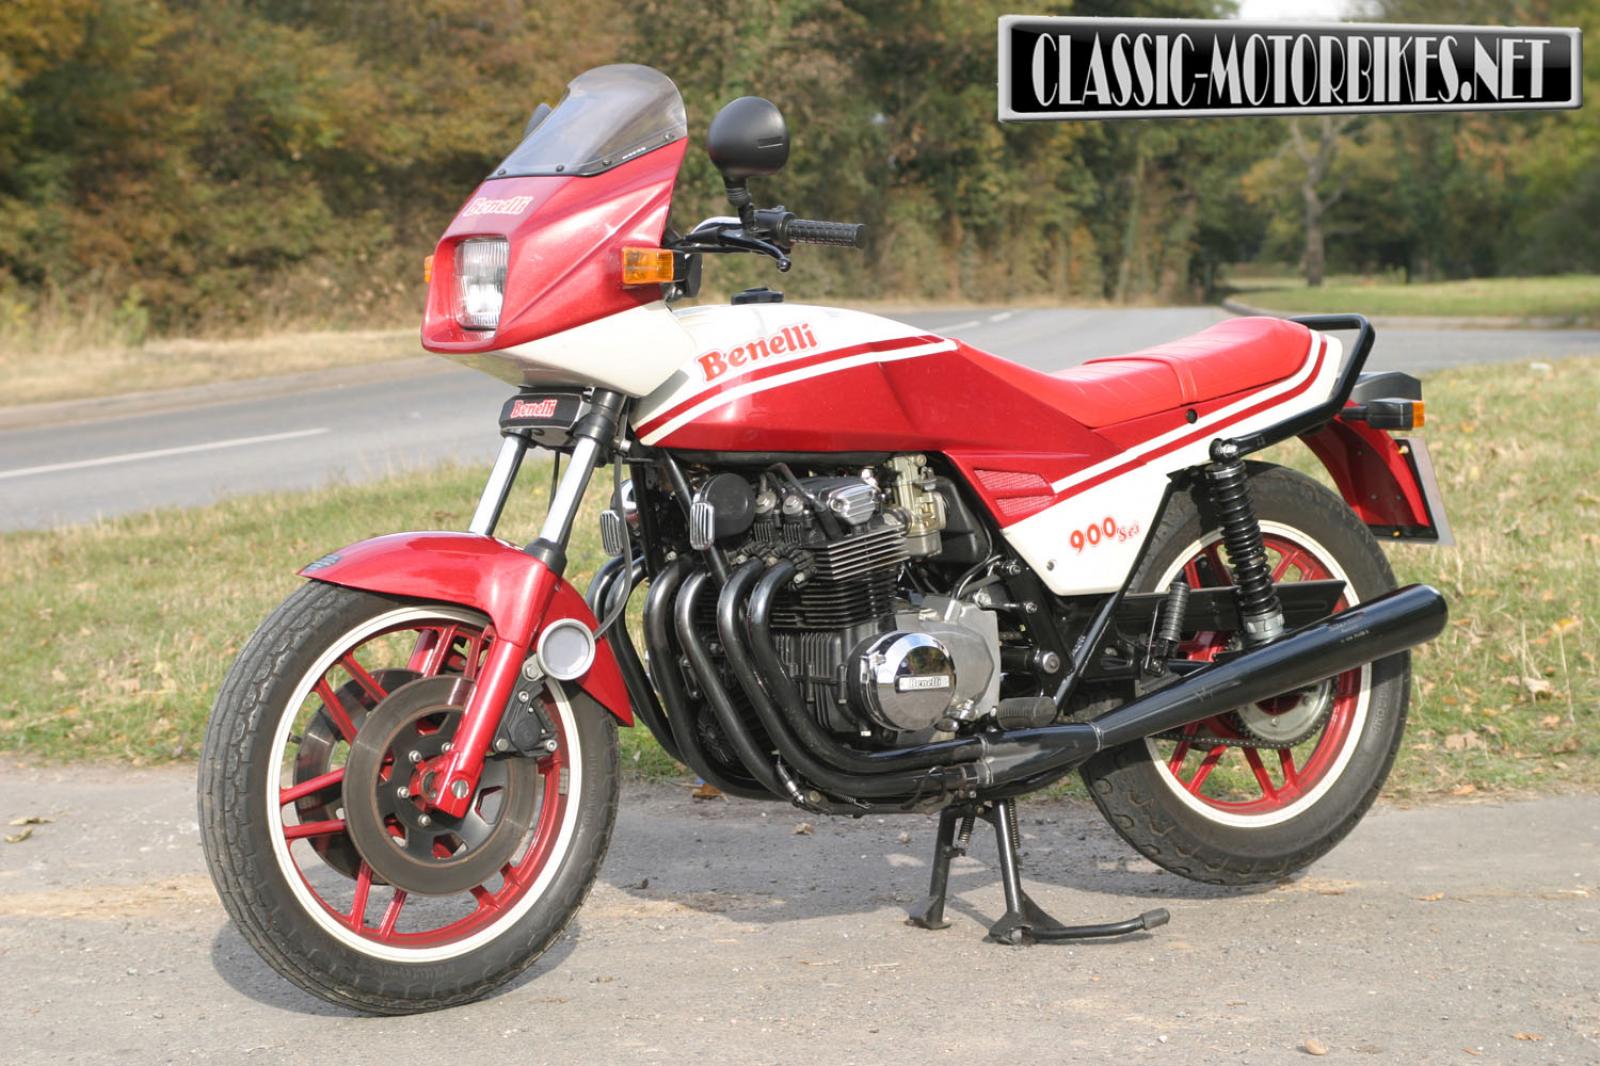 Review of Benelli 654 1980: pictures, live photos 